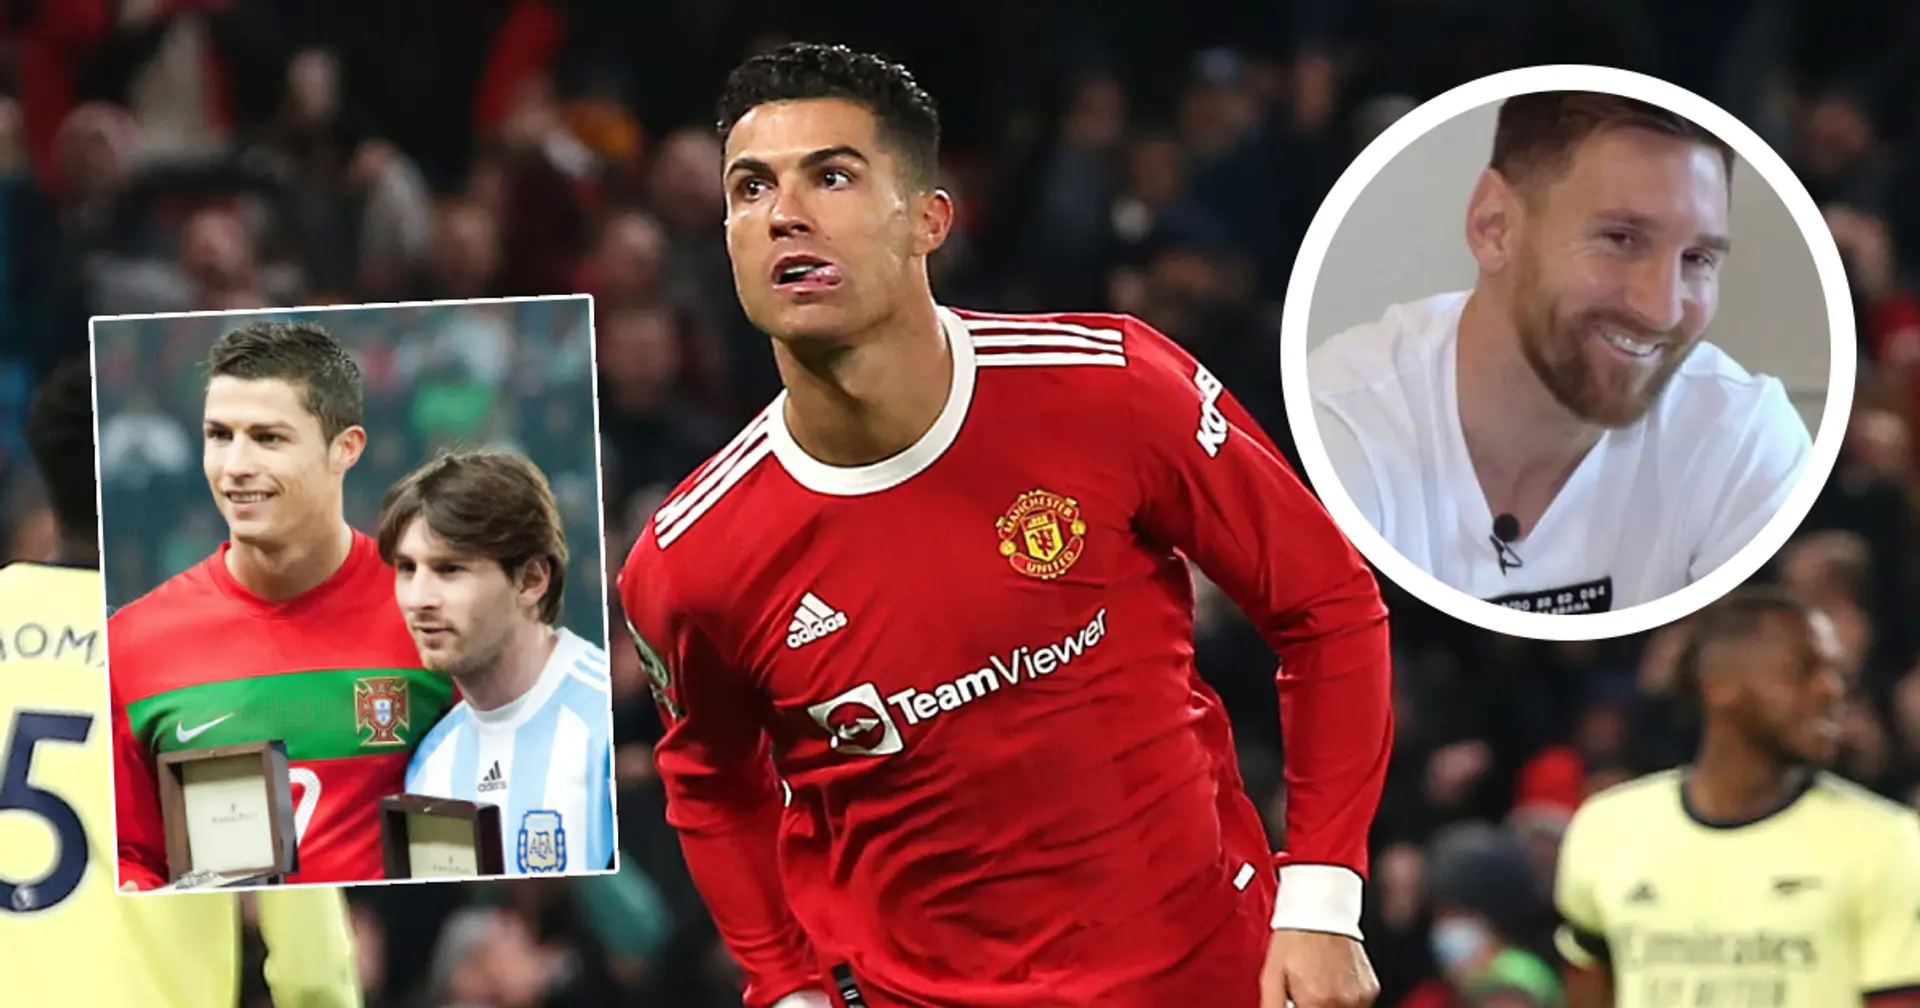 'It's been wonderful': Lionel Messi opens up on Cristiano Ronaldo rivalry after Ballon d'Or win